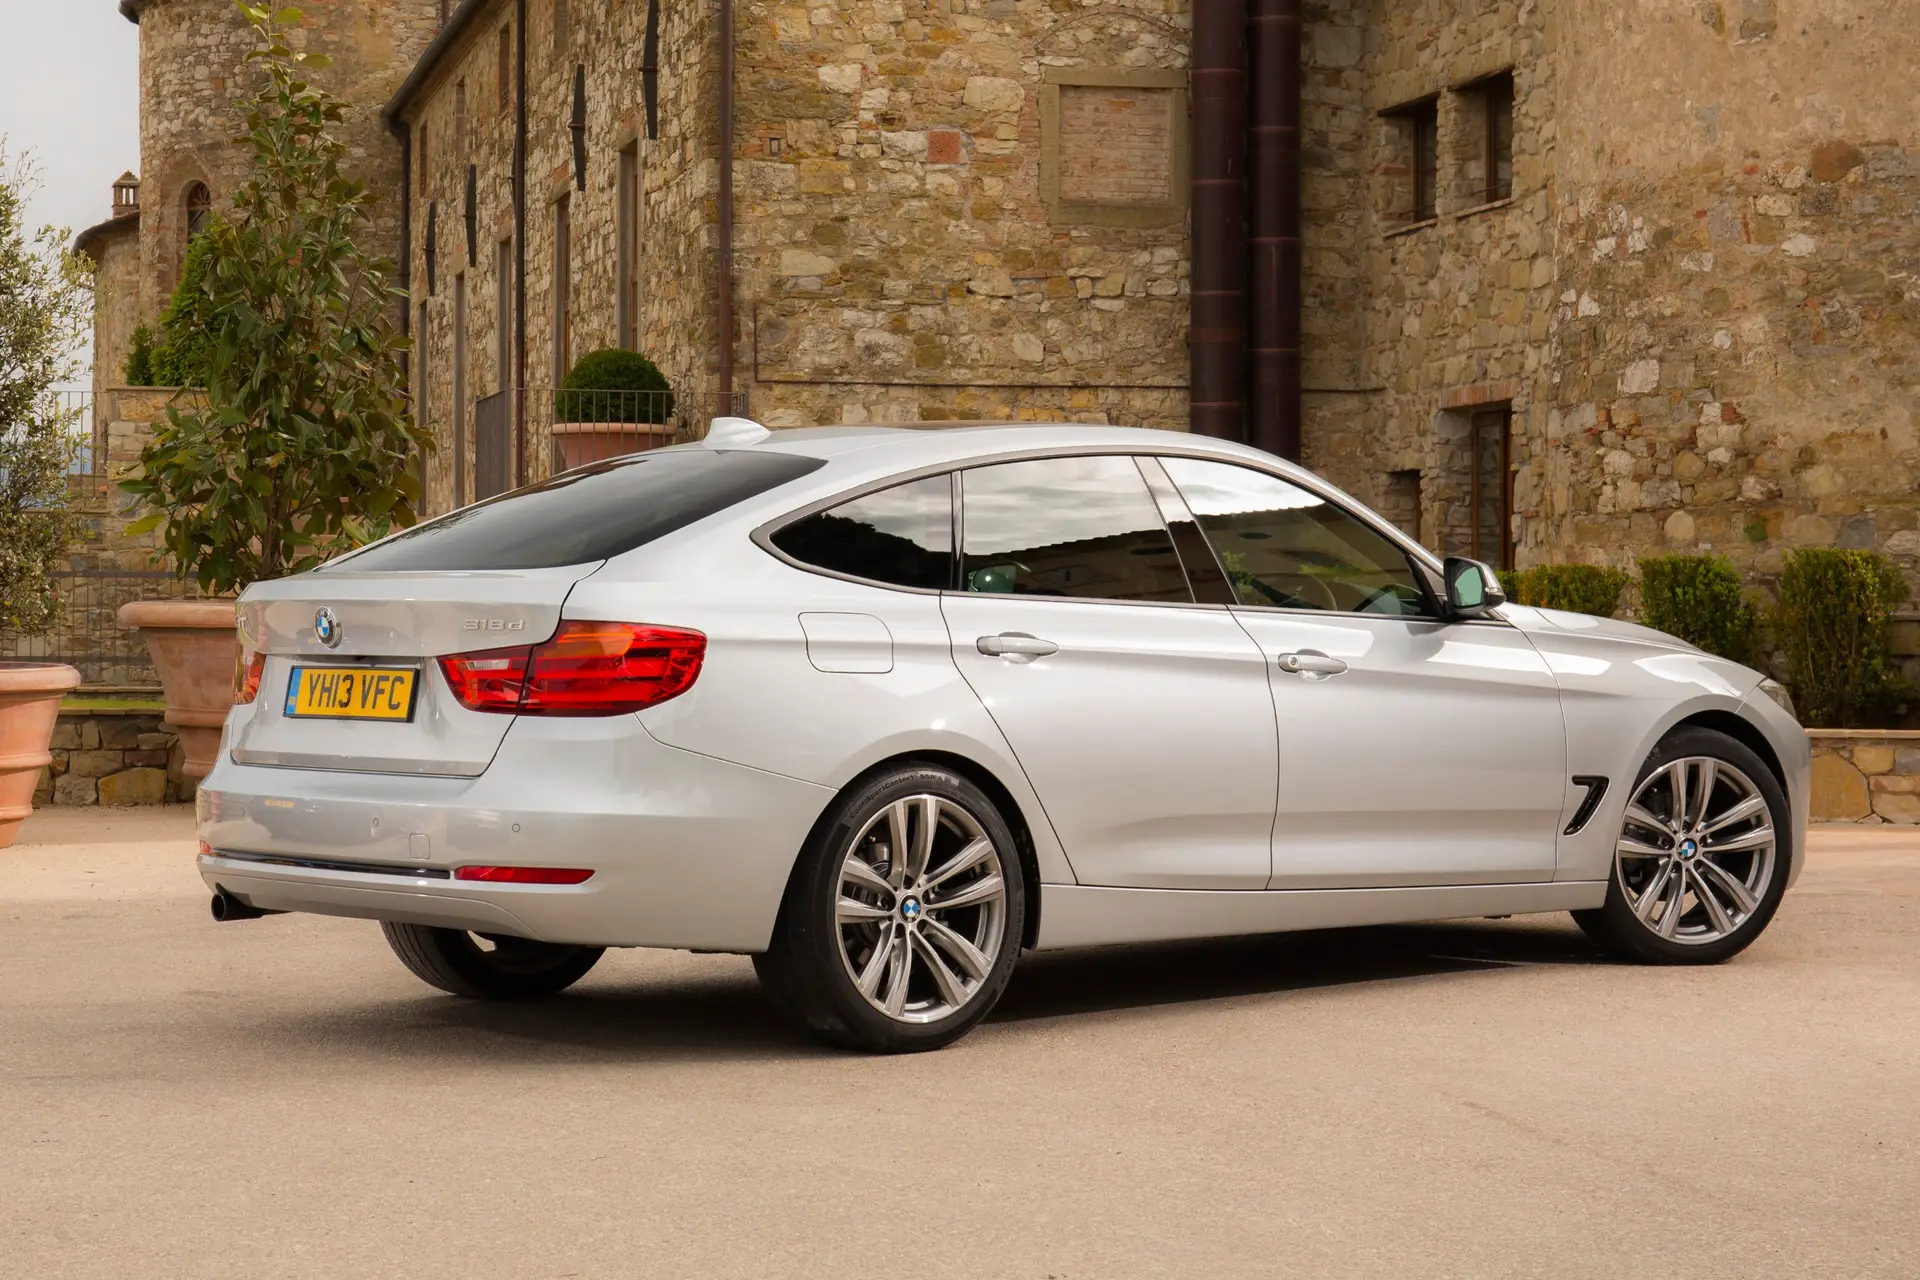 BMW 3 Series GT (2013-2020) Review: exterior rear three quarter photo of the BMW 3 Series GT 